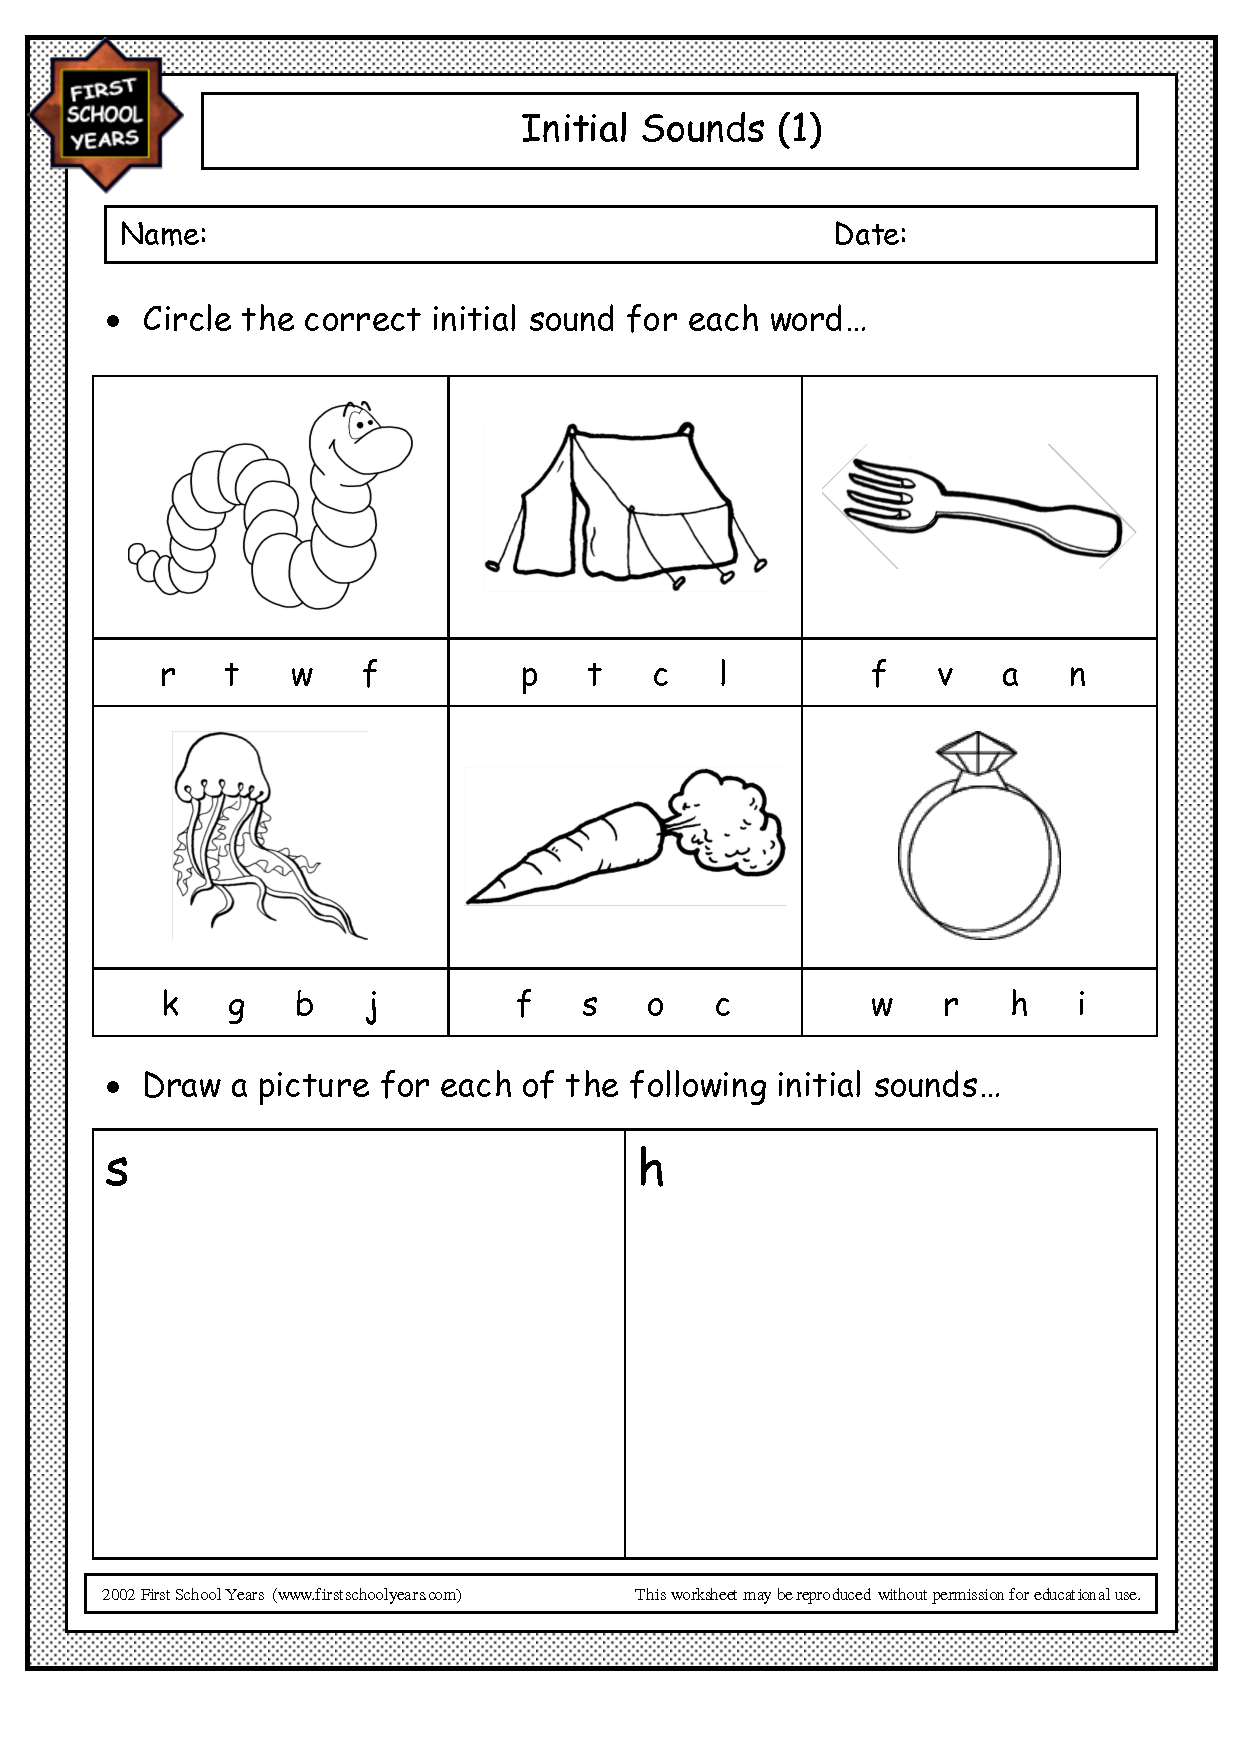 printable-jolly-phonics-sound-jolly-phonics-picture-flashcards-in